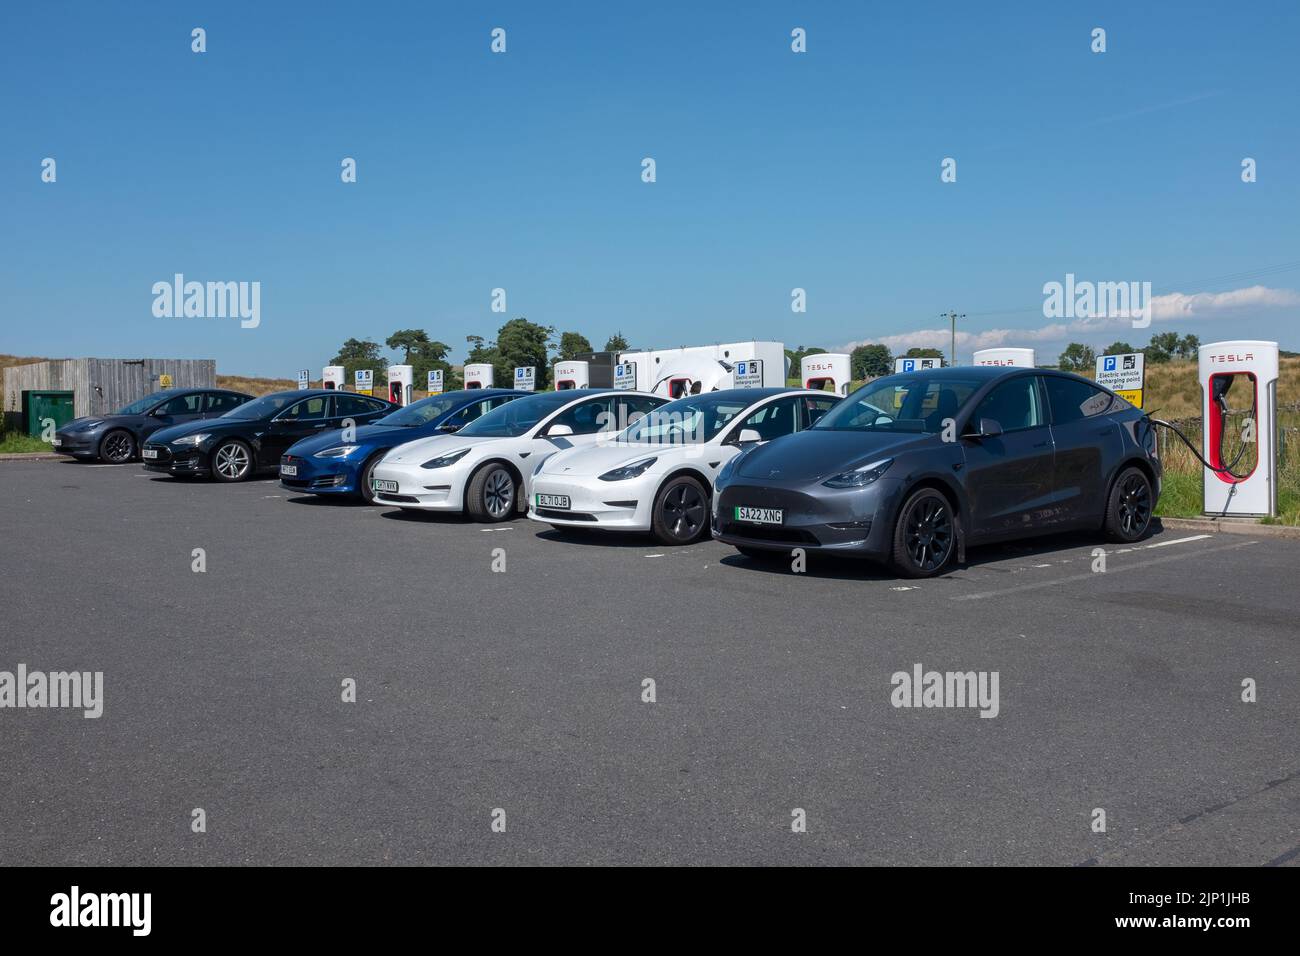 Tesla, electric cars charging at rapid charging station. Tebay Services, on M6 in United Kingdom Stock Photo